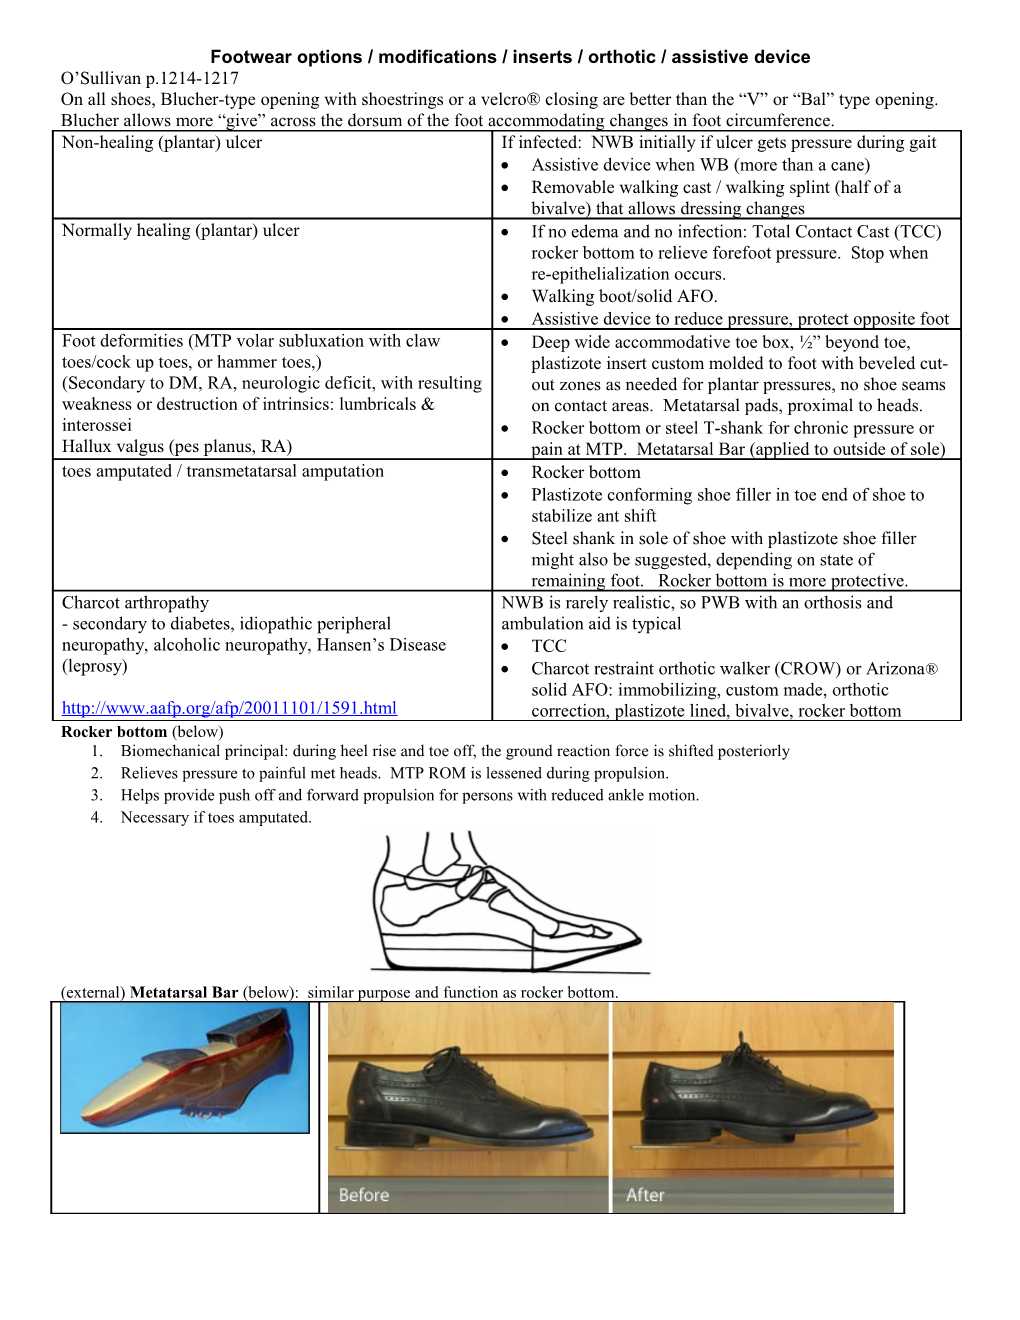 Possible Footwear Options / Modifications / Inserts / Orthotic (And Assistive Device) For